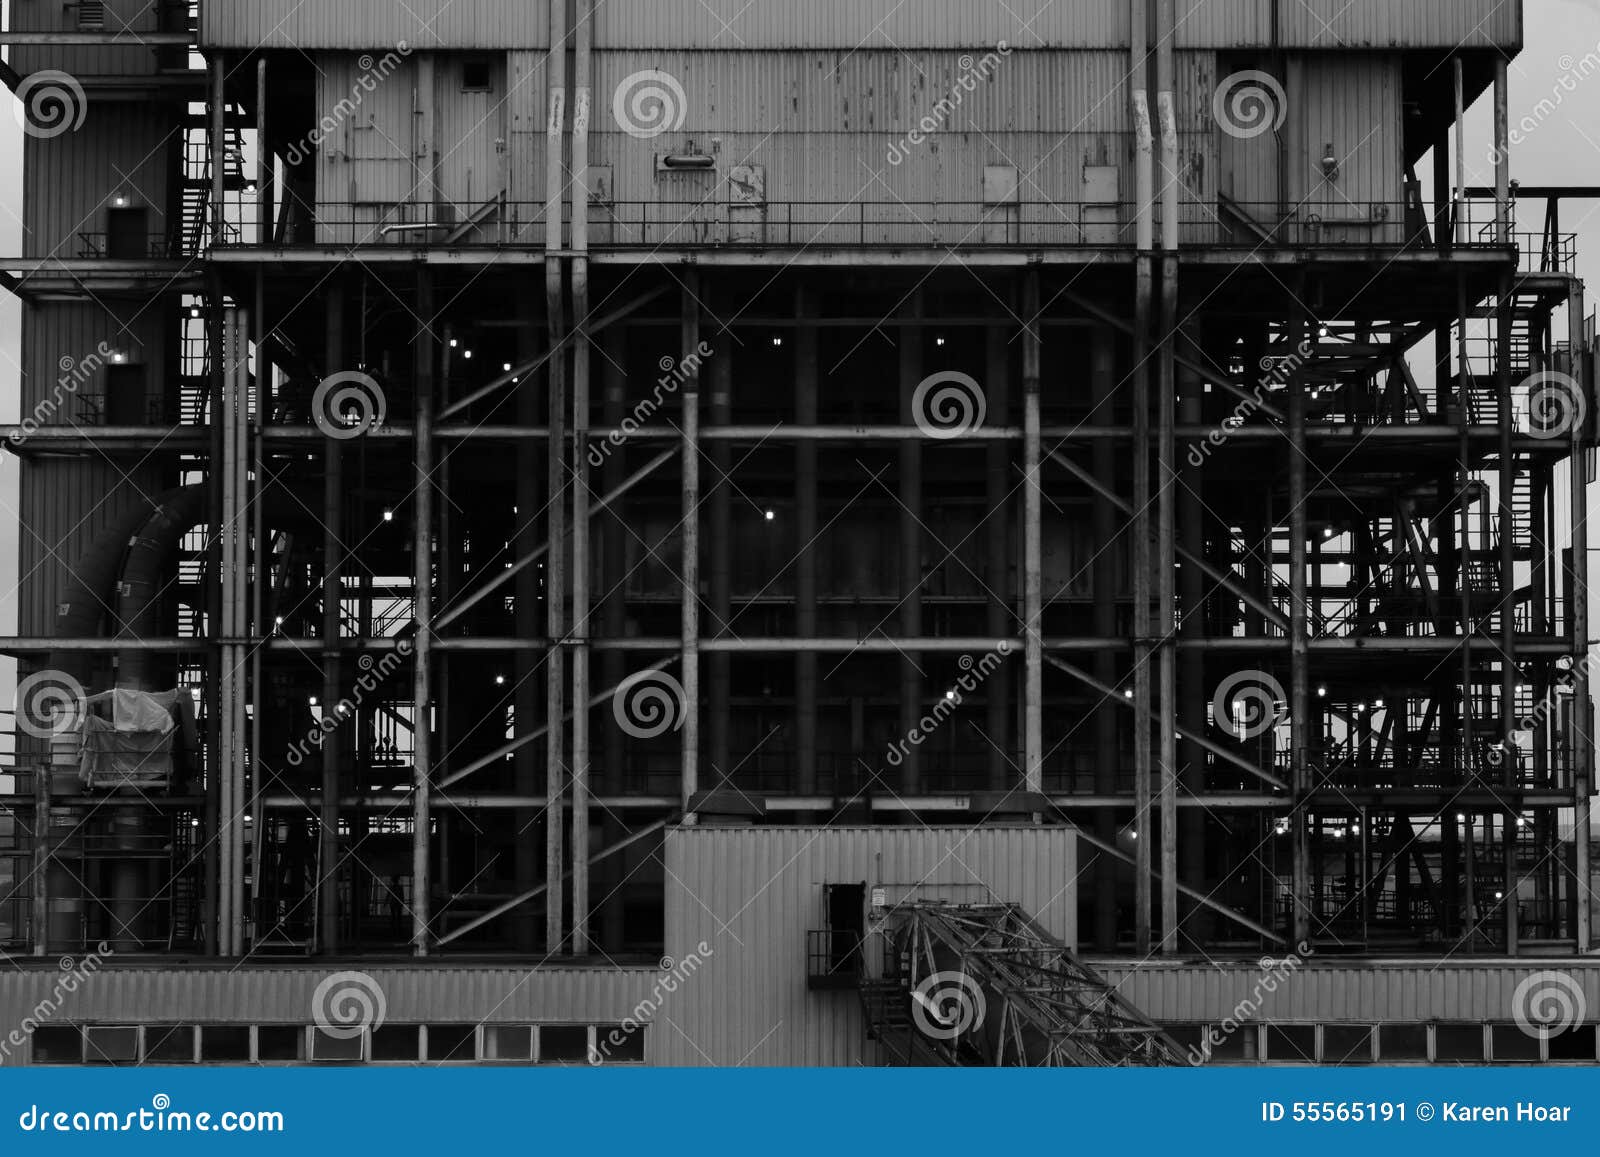 industrial worksite in black and white